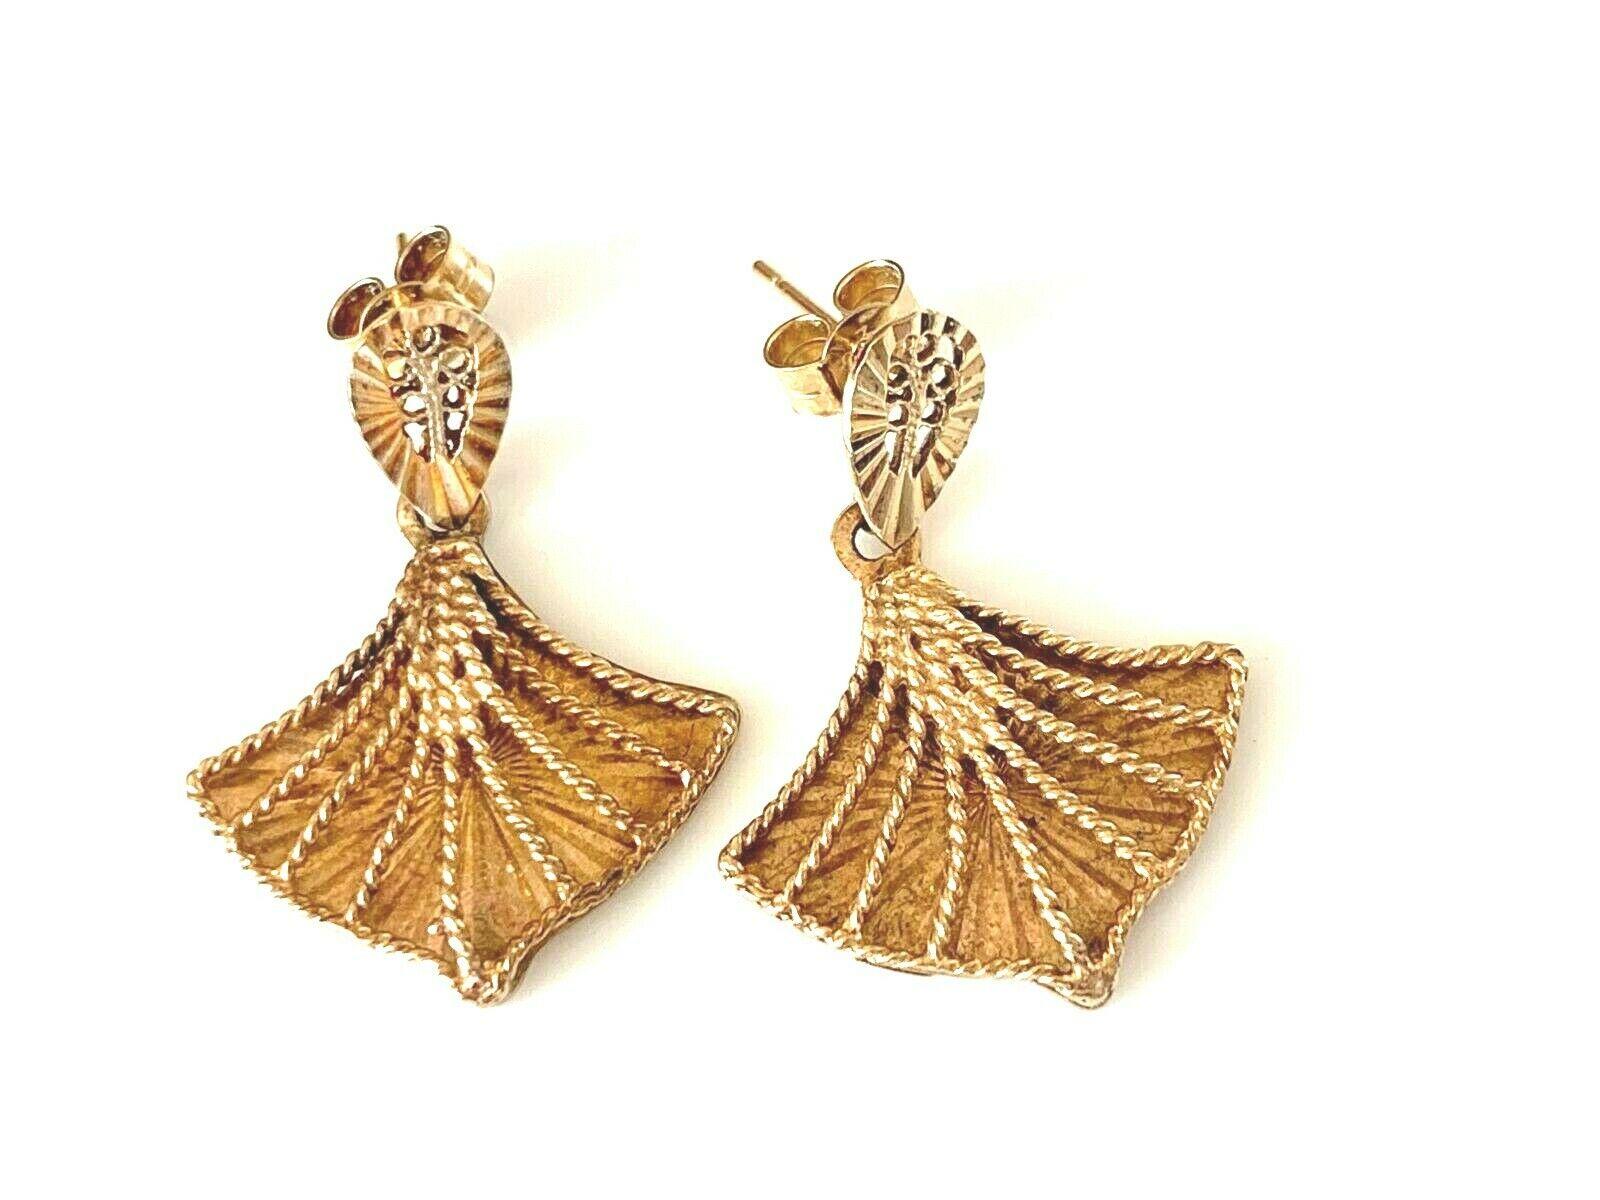 Beautifully Simplistic Traditional design
9ct 375 Gold Rope Fan Earrings
Handmade era -1960s
Stamped 9ct on each 